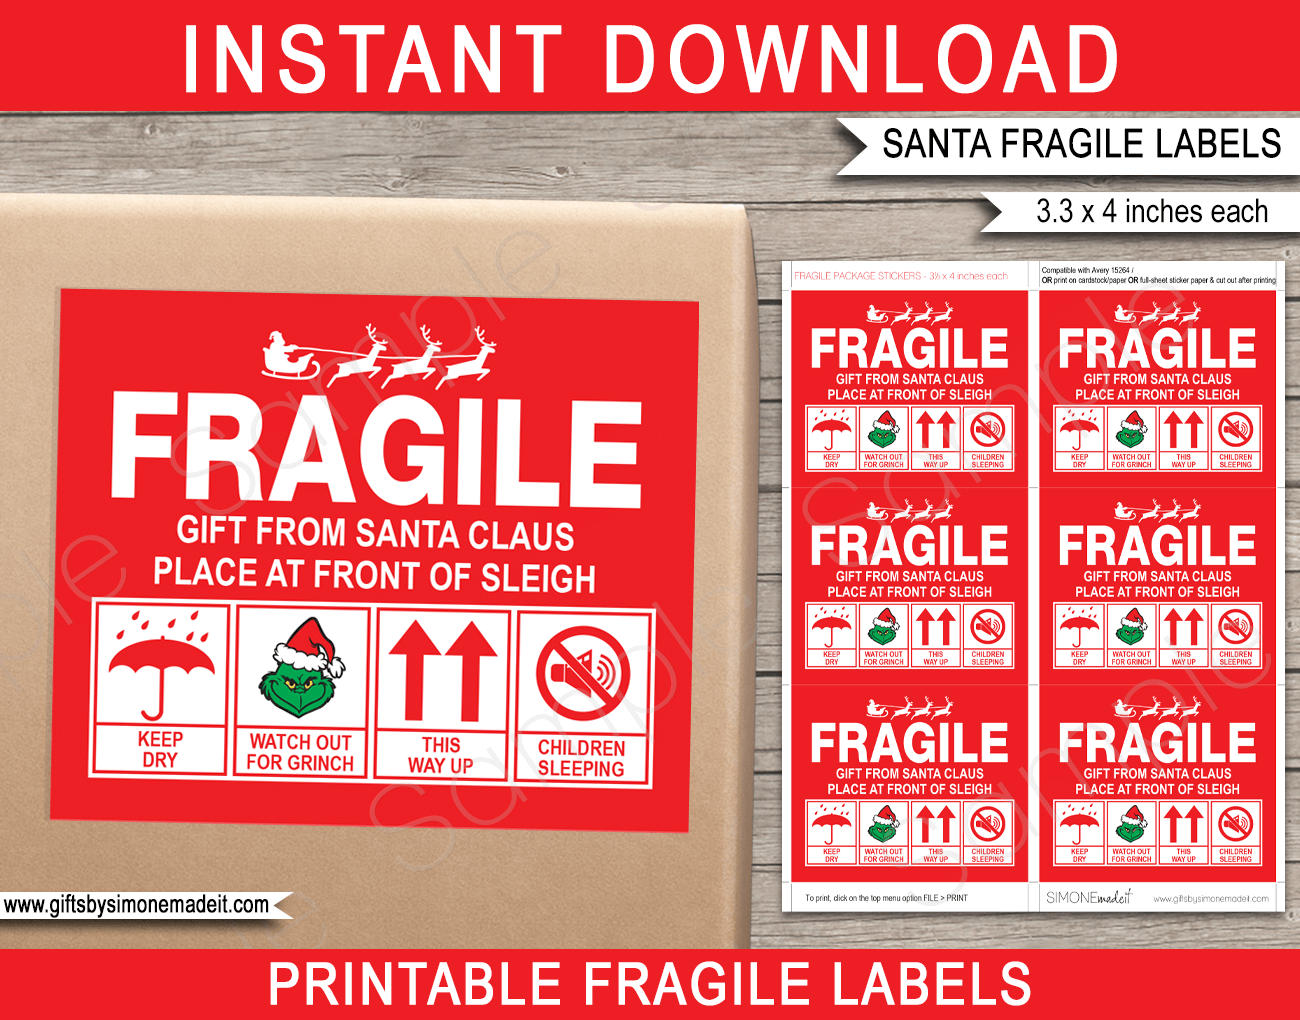 Christmas Gift Fragile Stickers Template | Printable Santa Mail Labels | North Pole Stickers Template | Santa's Workshop | Last Minute Gift Wrapping | INSTANT DOWNLOAD via giftsbysimonemadeit.com